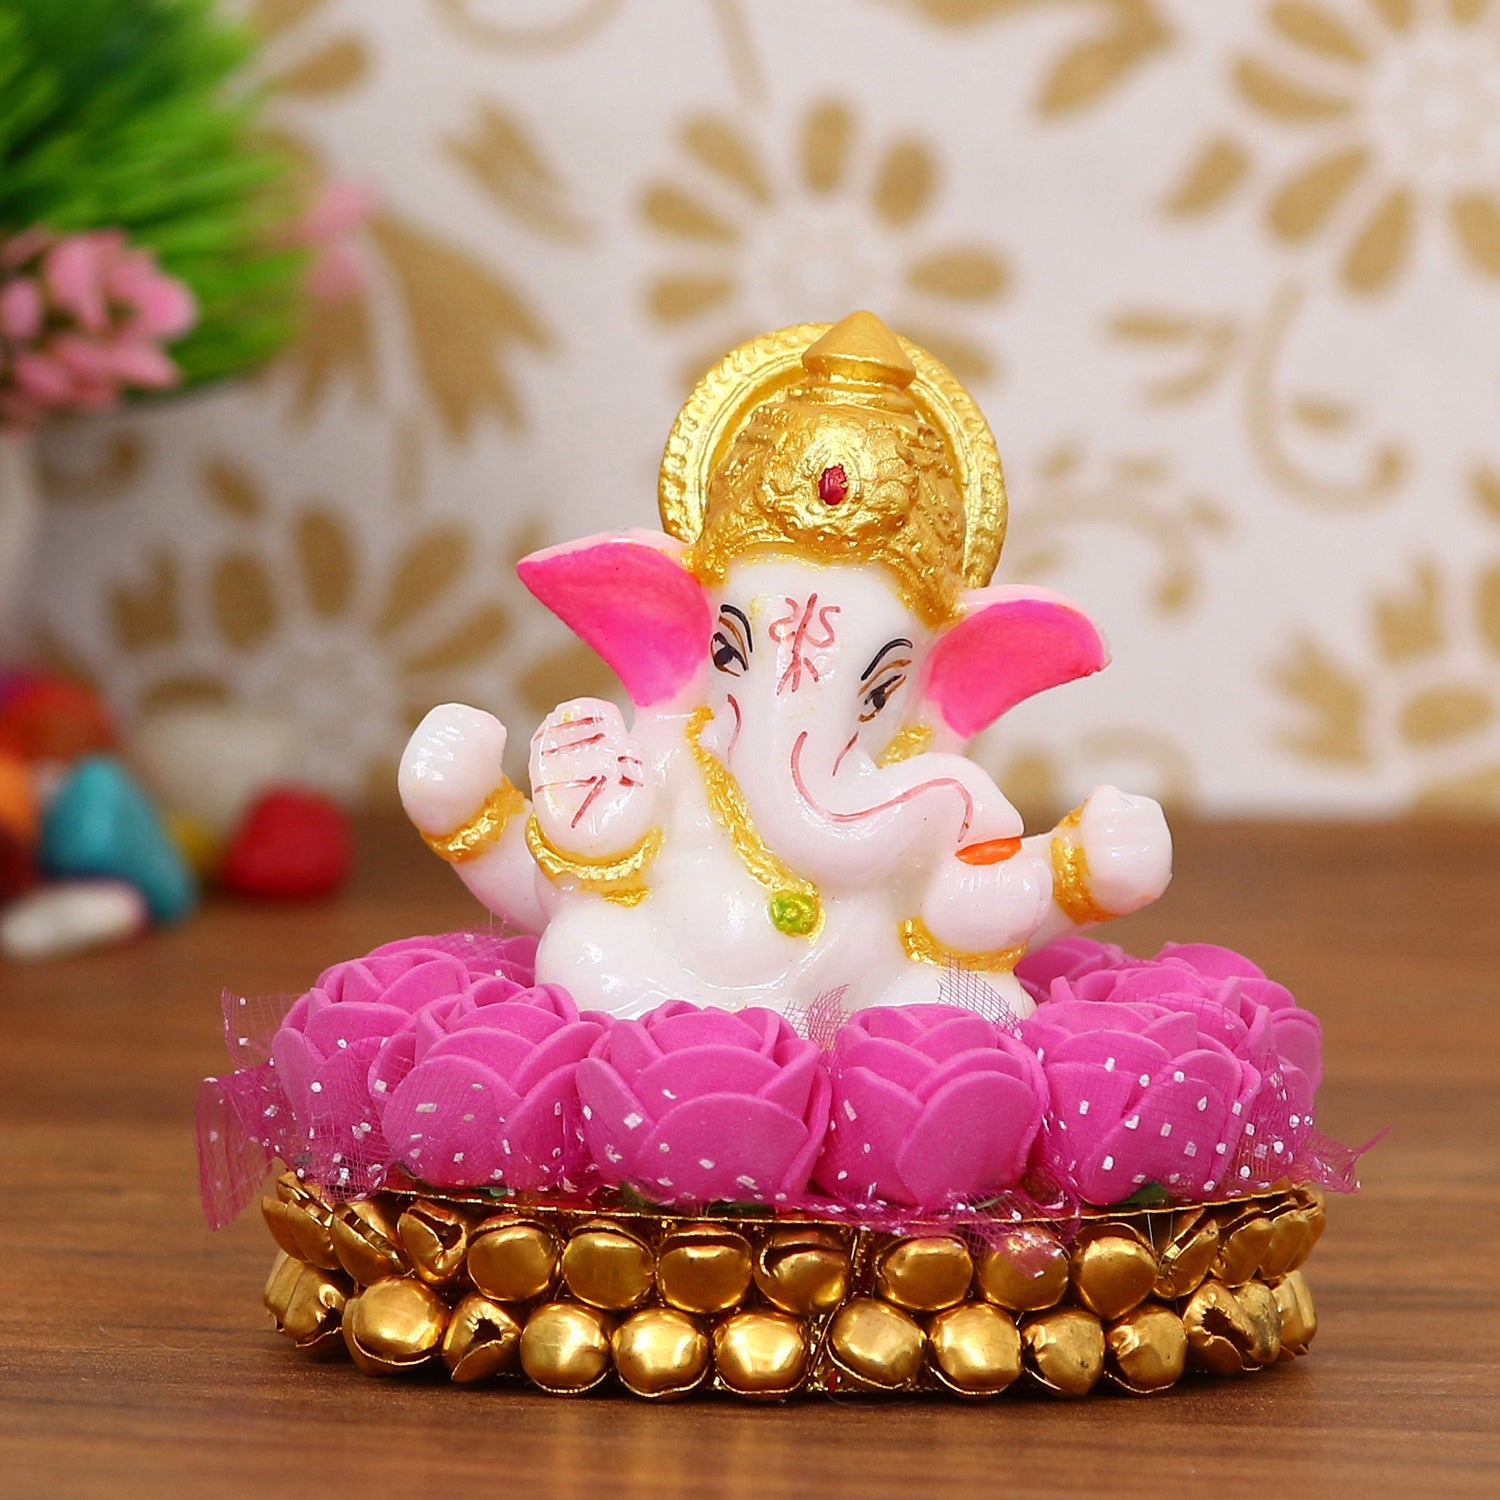 Polyresin Lord Ganesha Idol on Decorative Handcrafted Plate with Pink Flowers